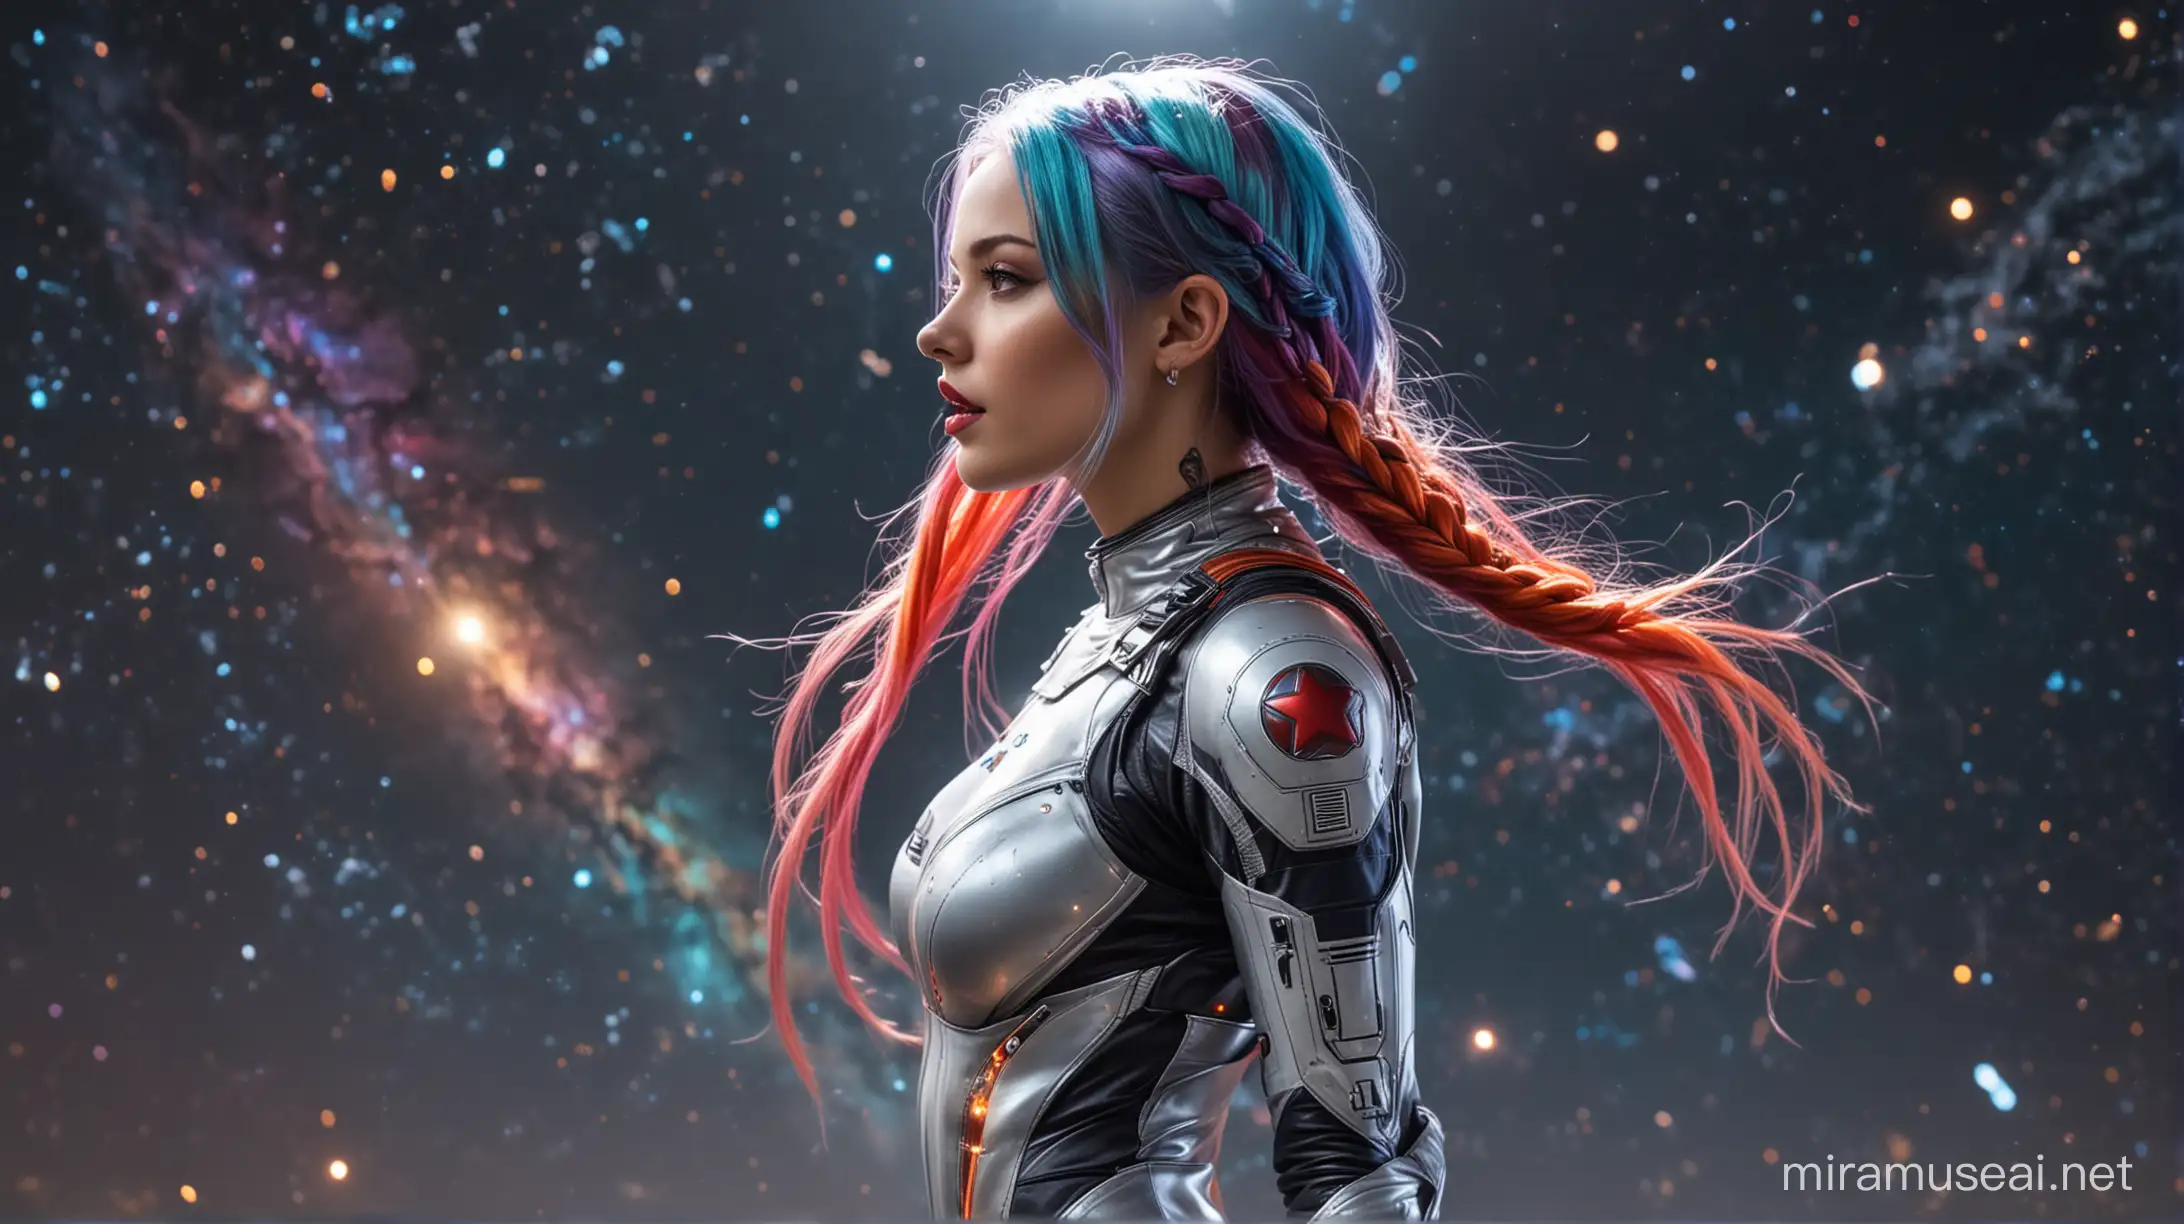 Slender Young Girl in Combat Spacesuit with Rainbow Hair and Glowing Tattoos